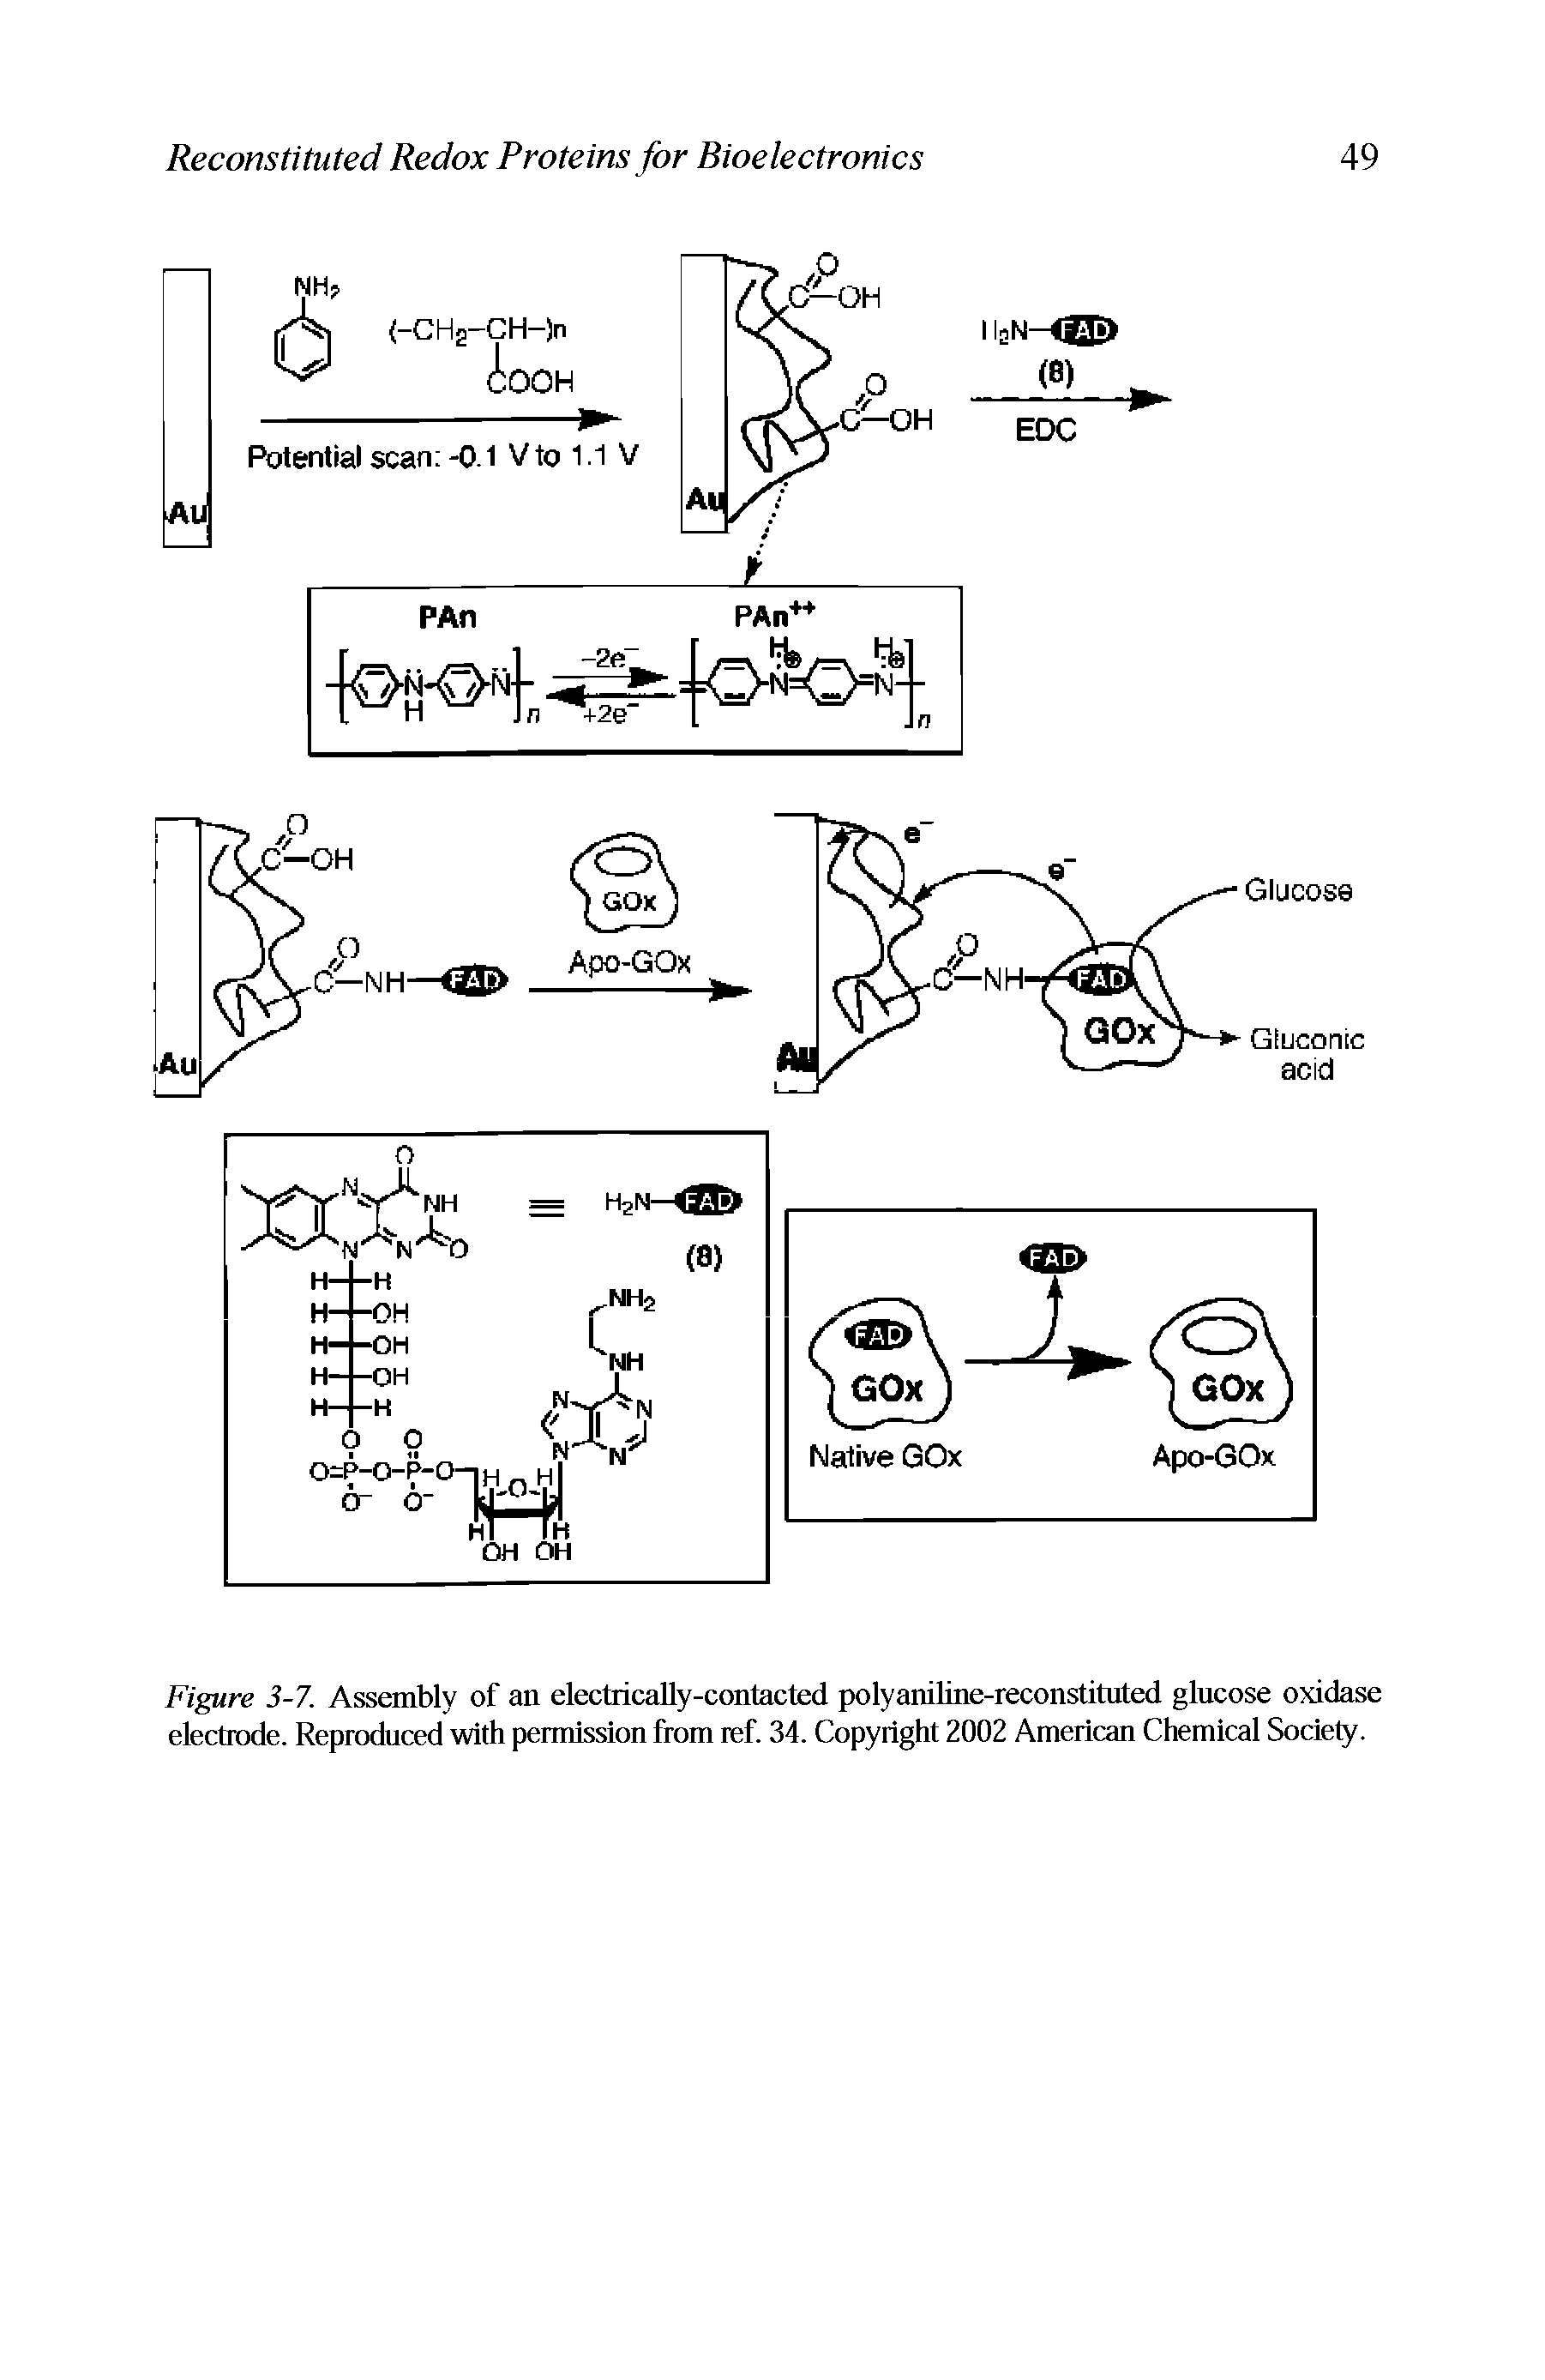 Figure 3-7. Assembly of an electrically-contacted polyaniUne-reconstituted glucose oxidase electrode. Reproduced with permission from ref. 34. Copyright 2002 American Chemical Society.